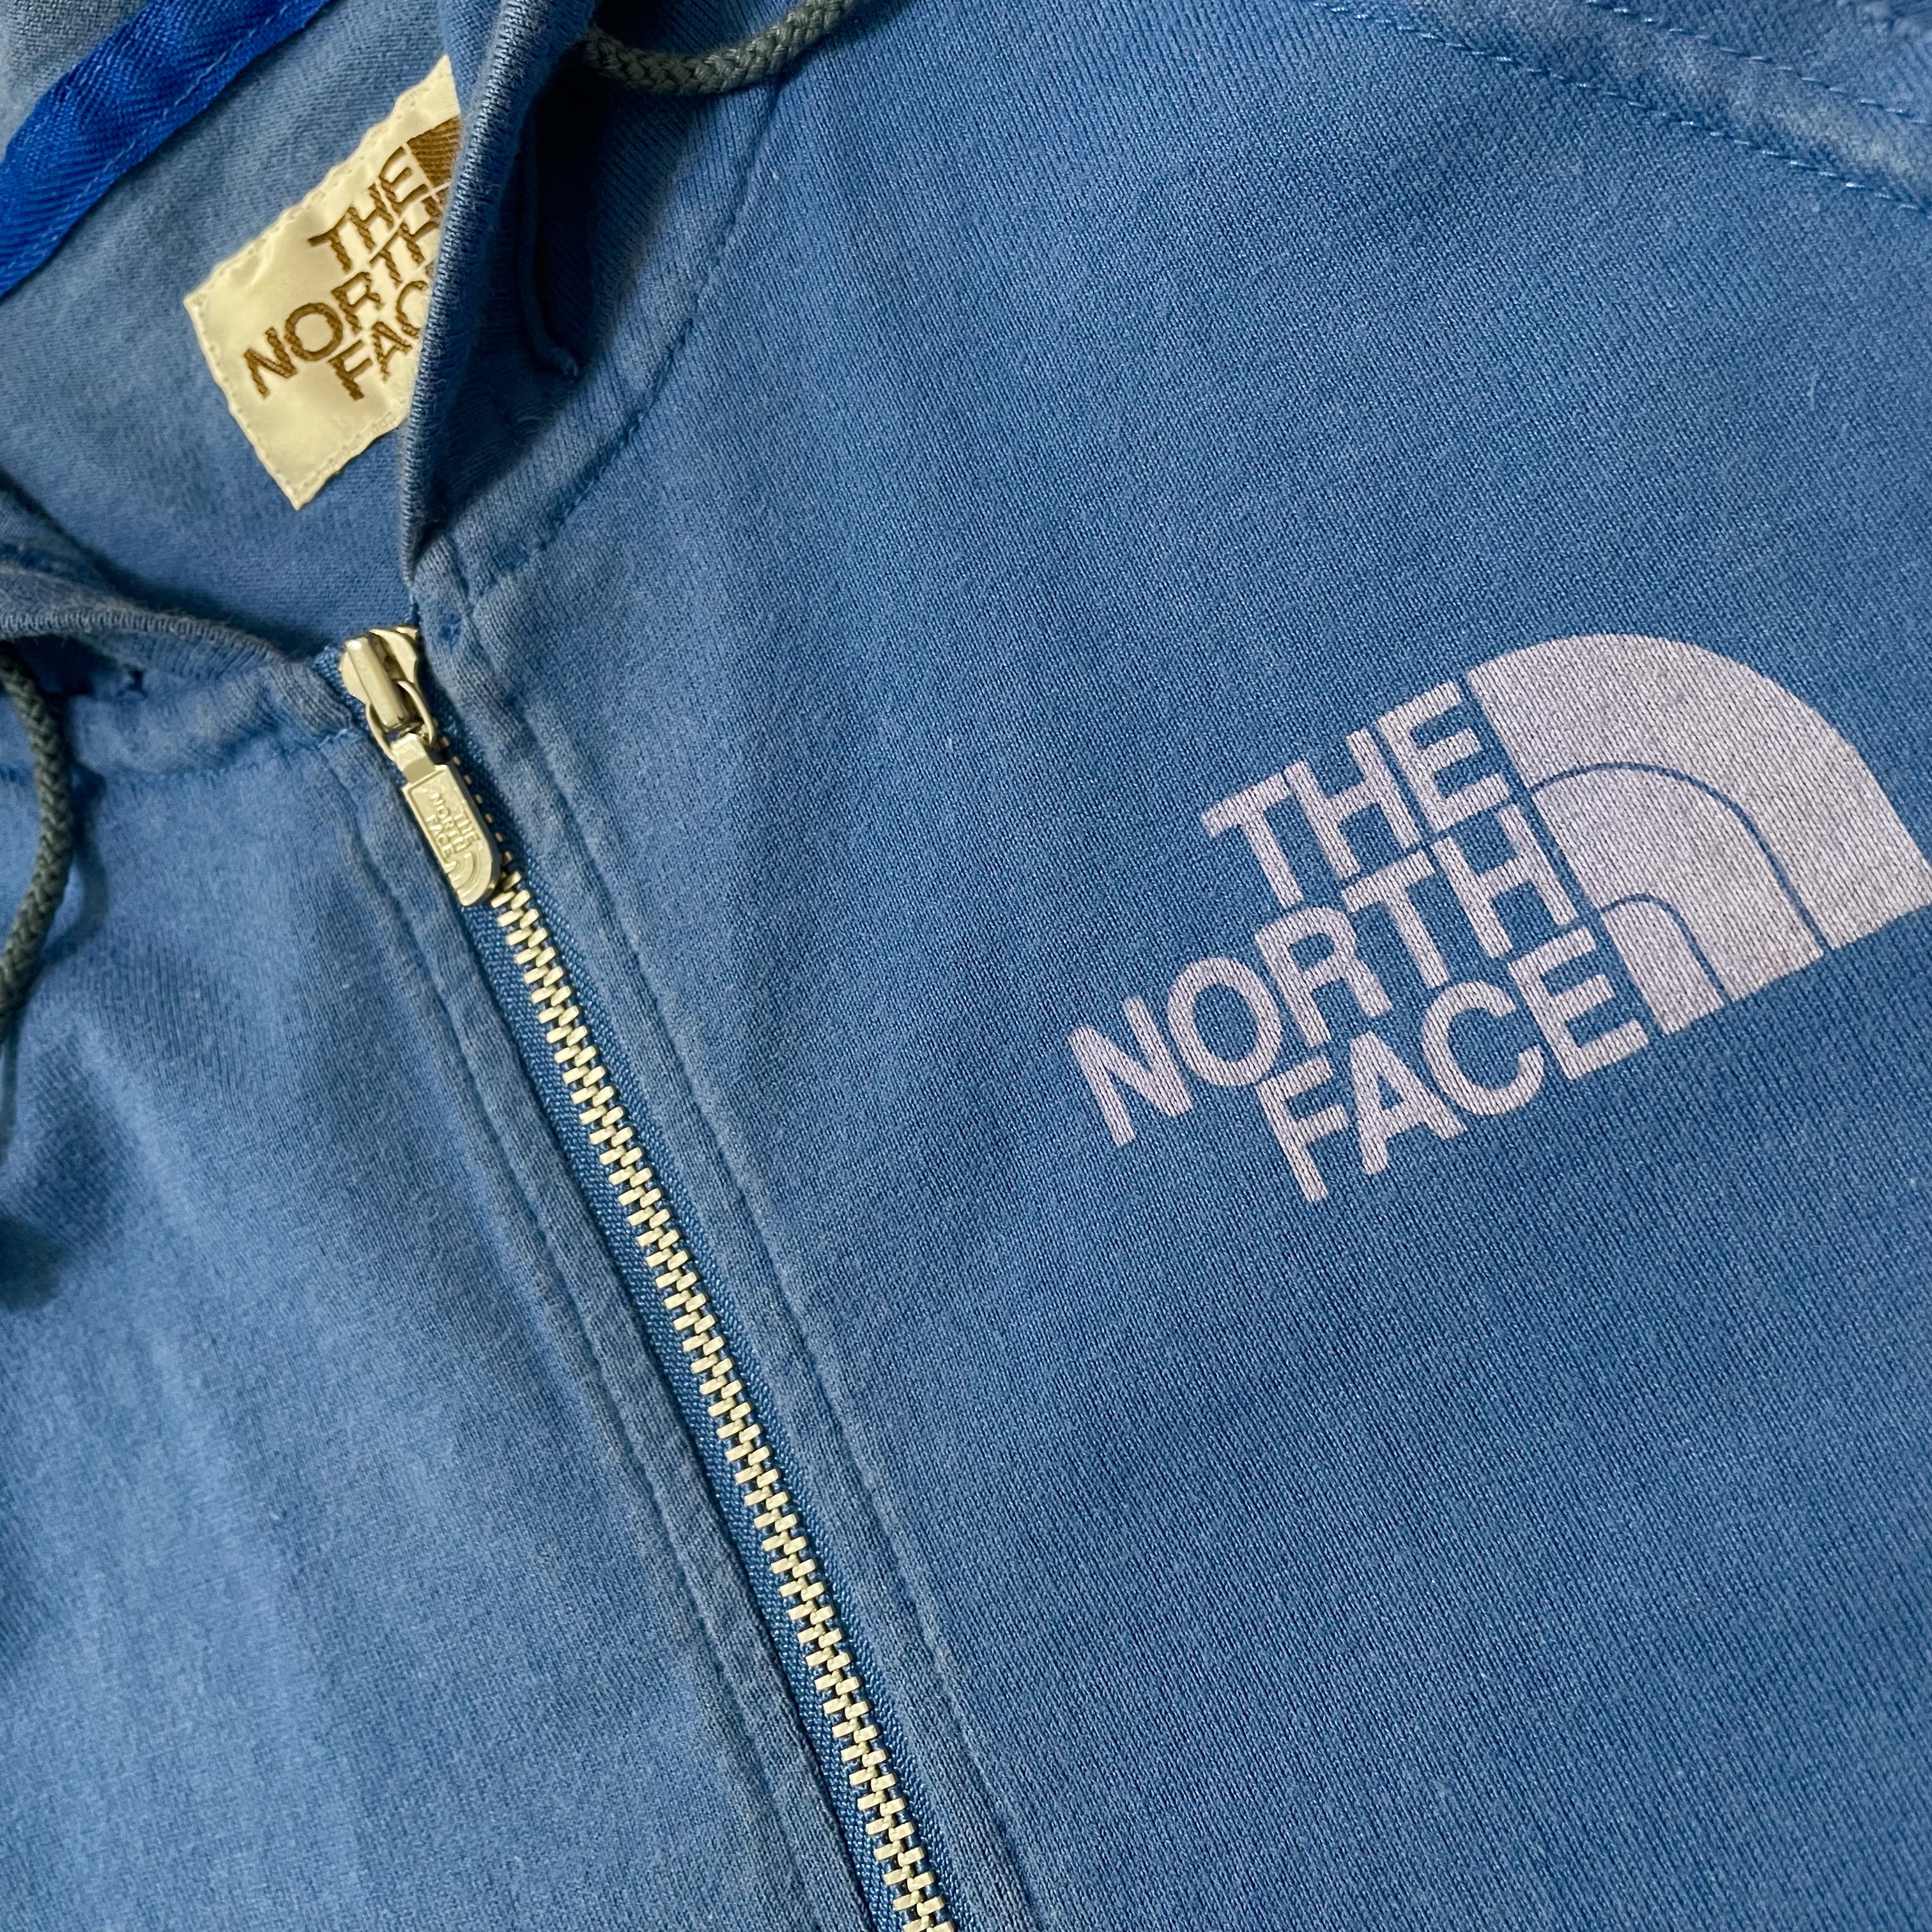 【THE NORTH FACE】茶タグ ジップアップパーカー ロゴ M US古着